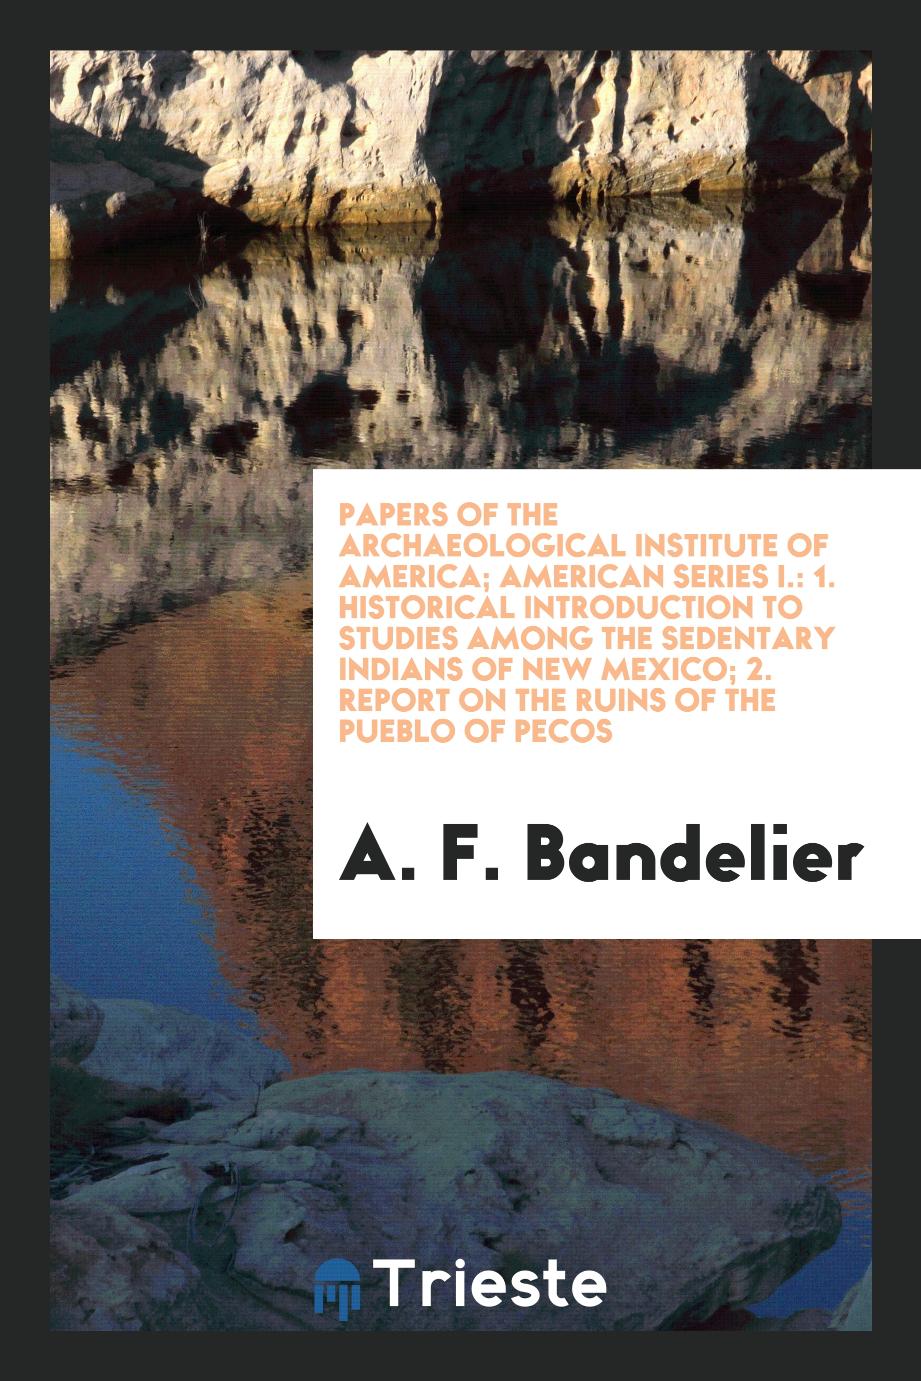 Papers of the Archaeological Institute of America; American Series I.: 1. Historical Introduction to Studies Among the Sedentary Indians of New Mexico; 2. Report on the Ruins of the Pueblo of Pecos